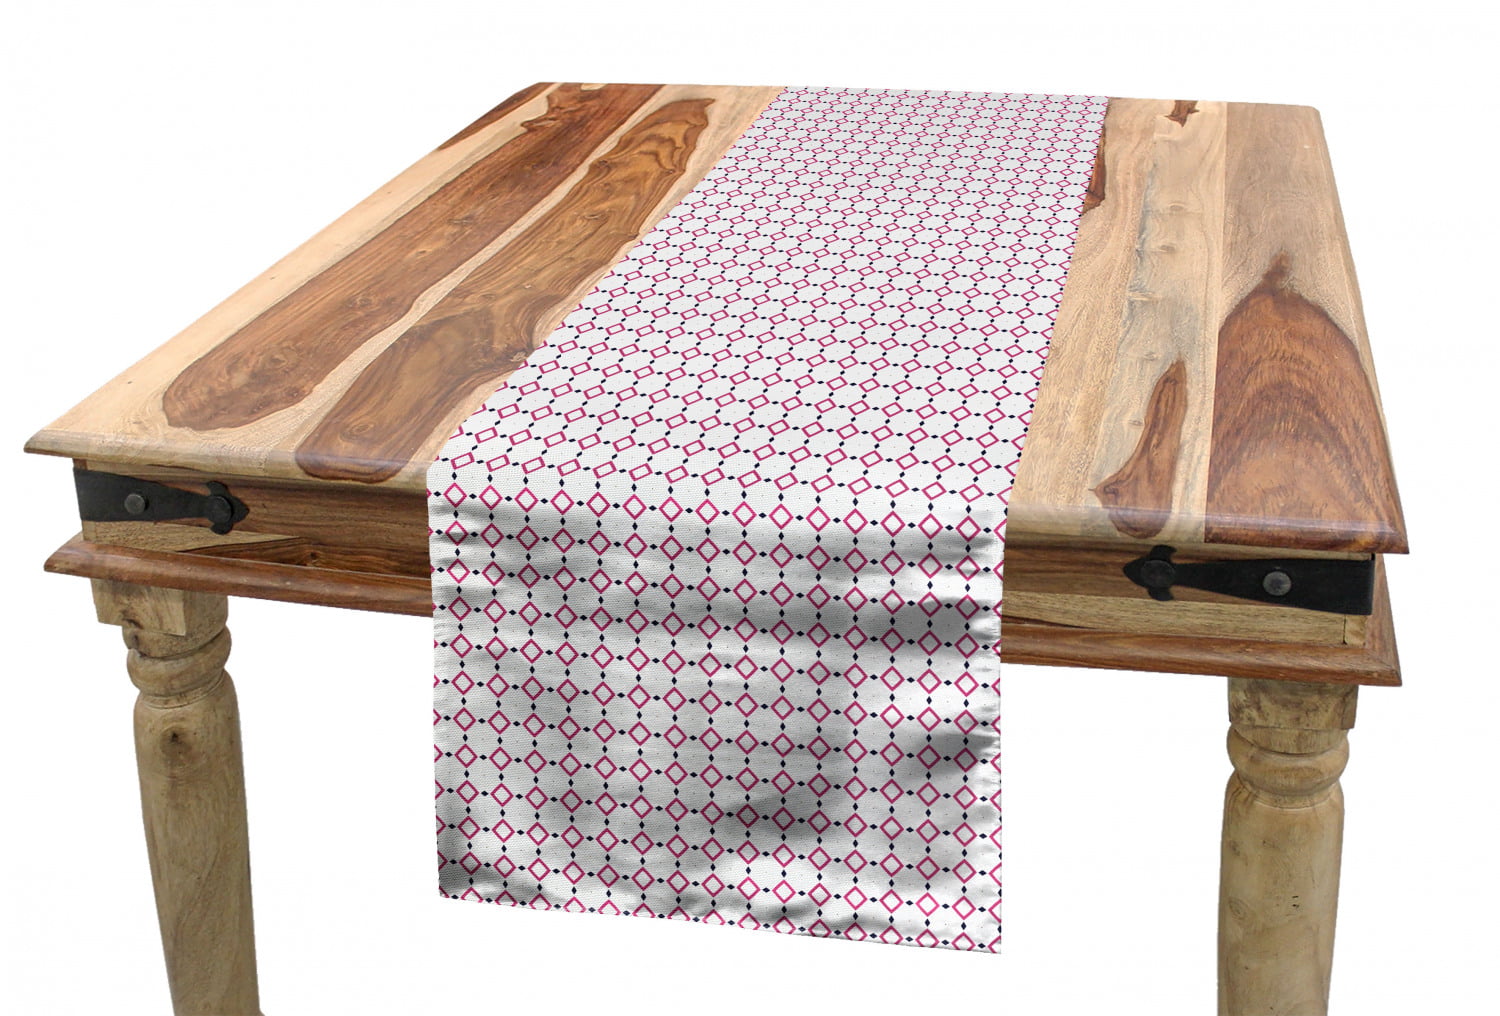 Ambesonne Abstract Table Runner Dining Room Kitchen Rectangular Runner Multicolor Geometric Symmetrical Pink Squares with Small Black Rhombuses in Recurring Design 16 X 90 